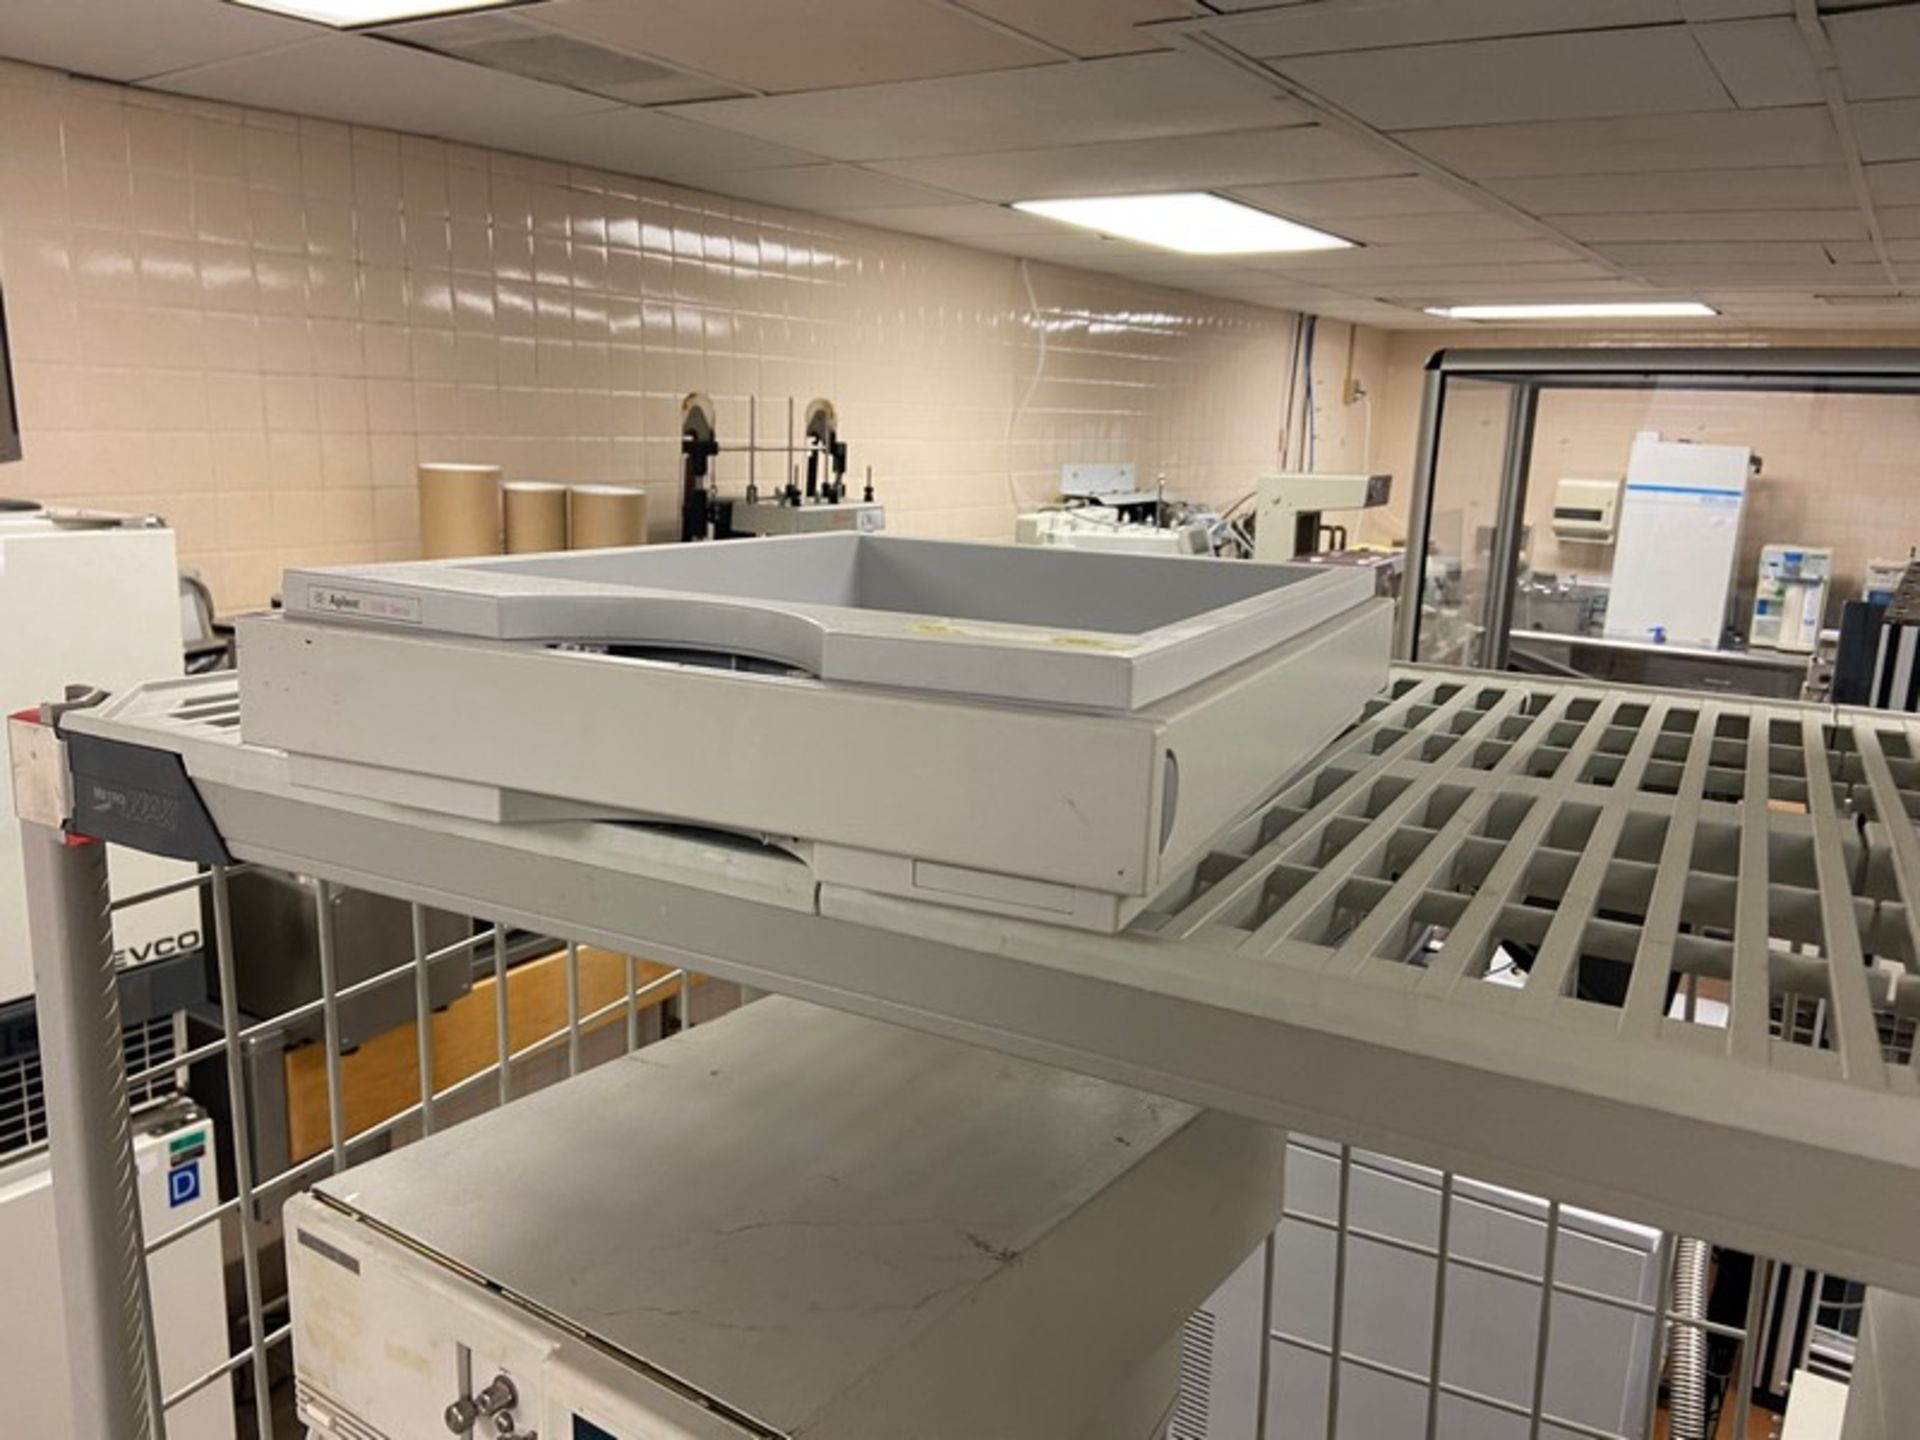 Hewlett Packard Mass Spectrometer System (LOCATED IN MIDDLETOWN, N.Y.)-FOR PACKAGING & SHIPPING - Image 6 of 7